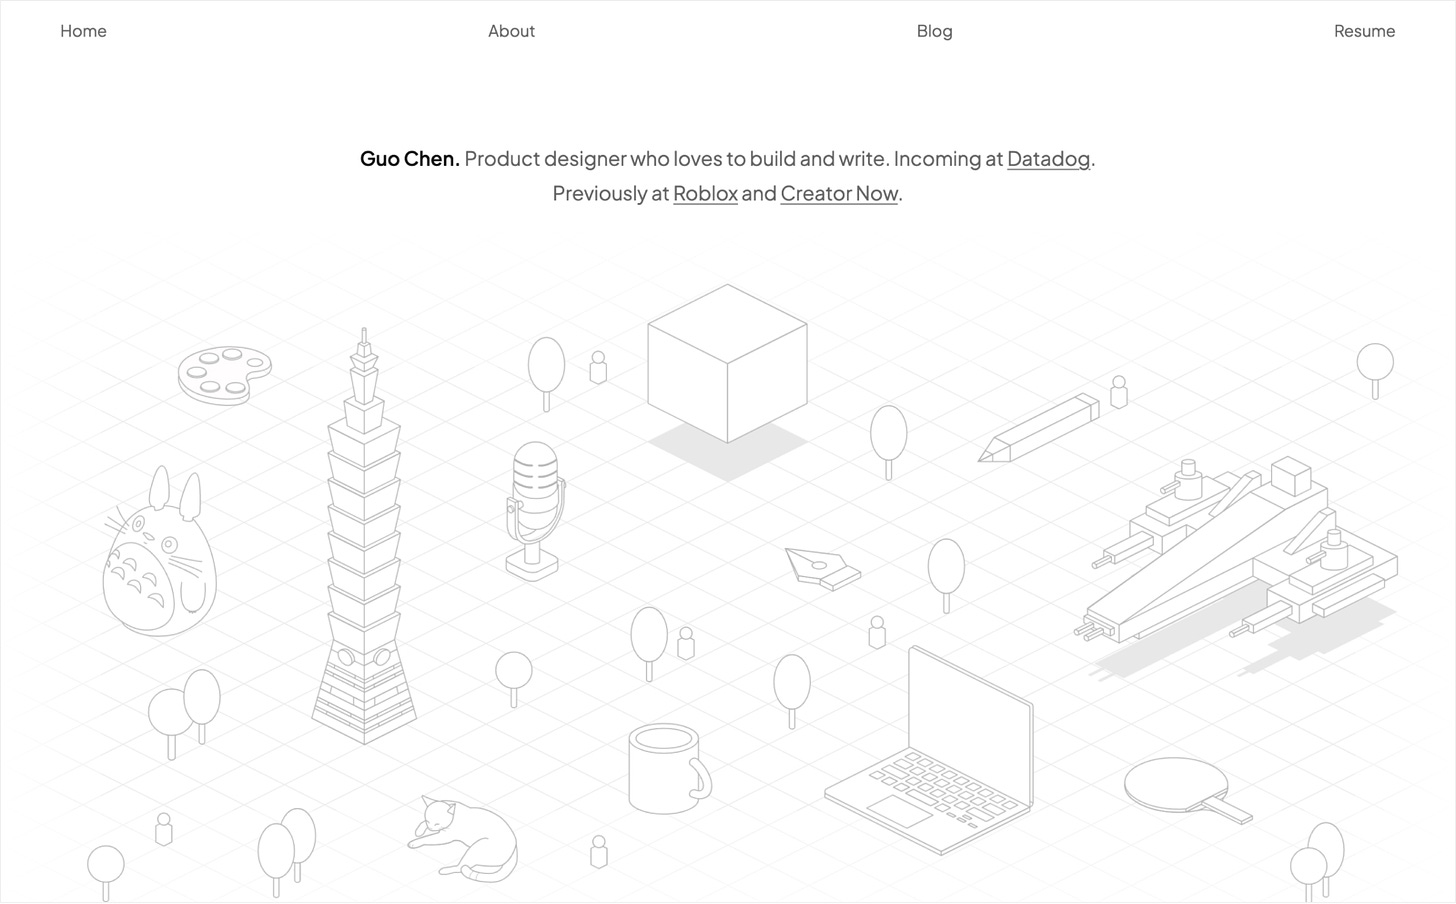 Guo's final portfolio home page displaying a centered text and isometric illustrations below